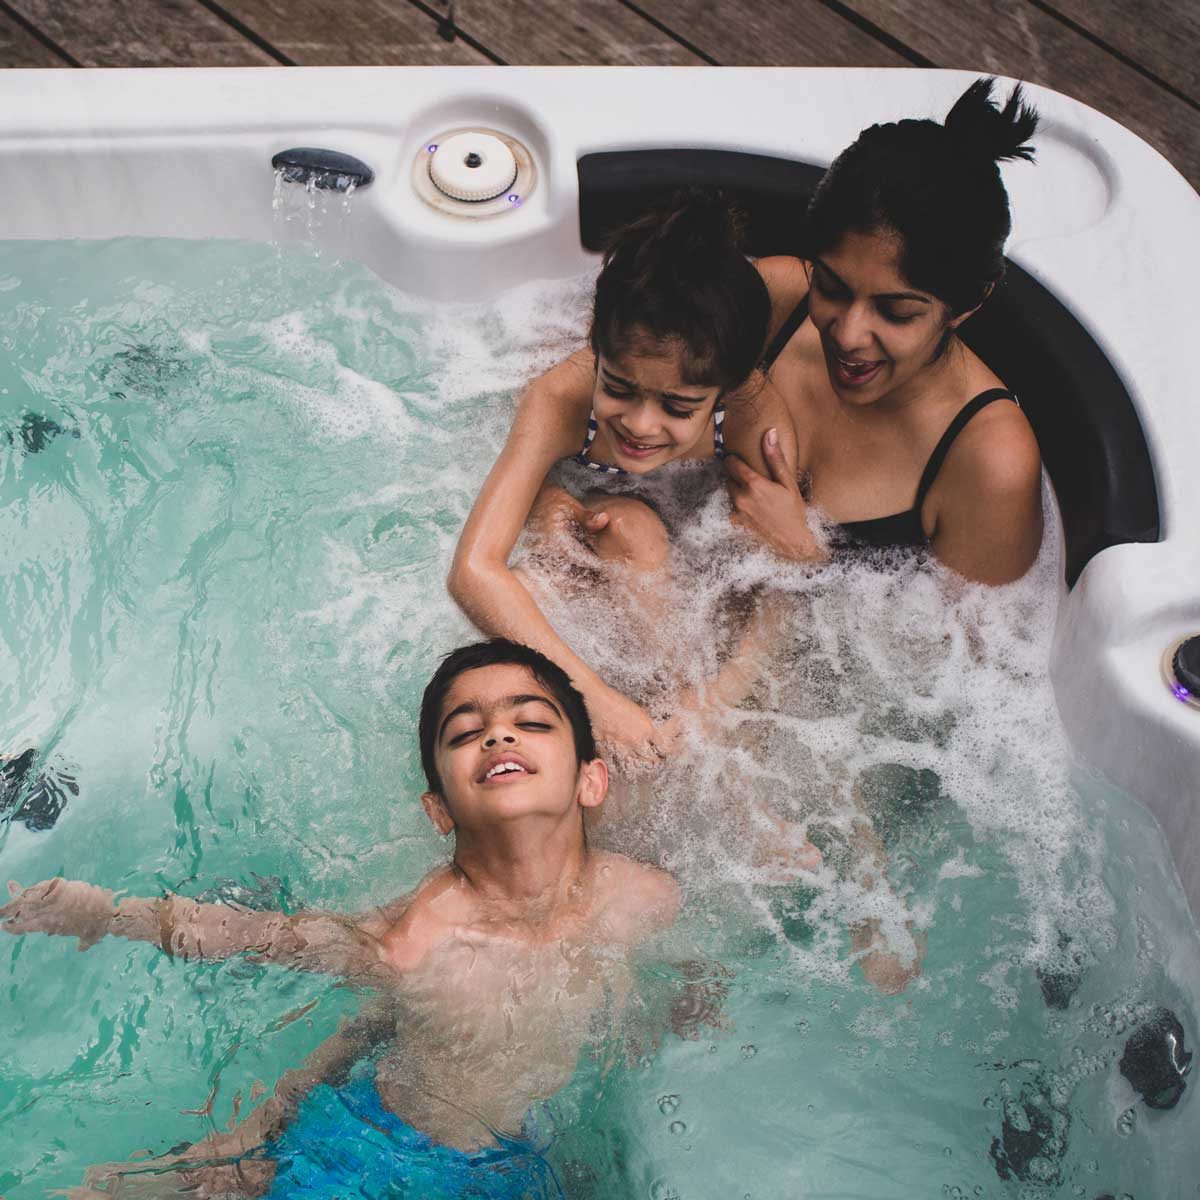 Therapeutic vs. Recreational Hot Tub: What's the Difference?